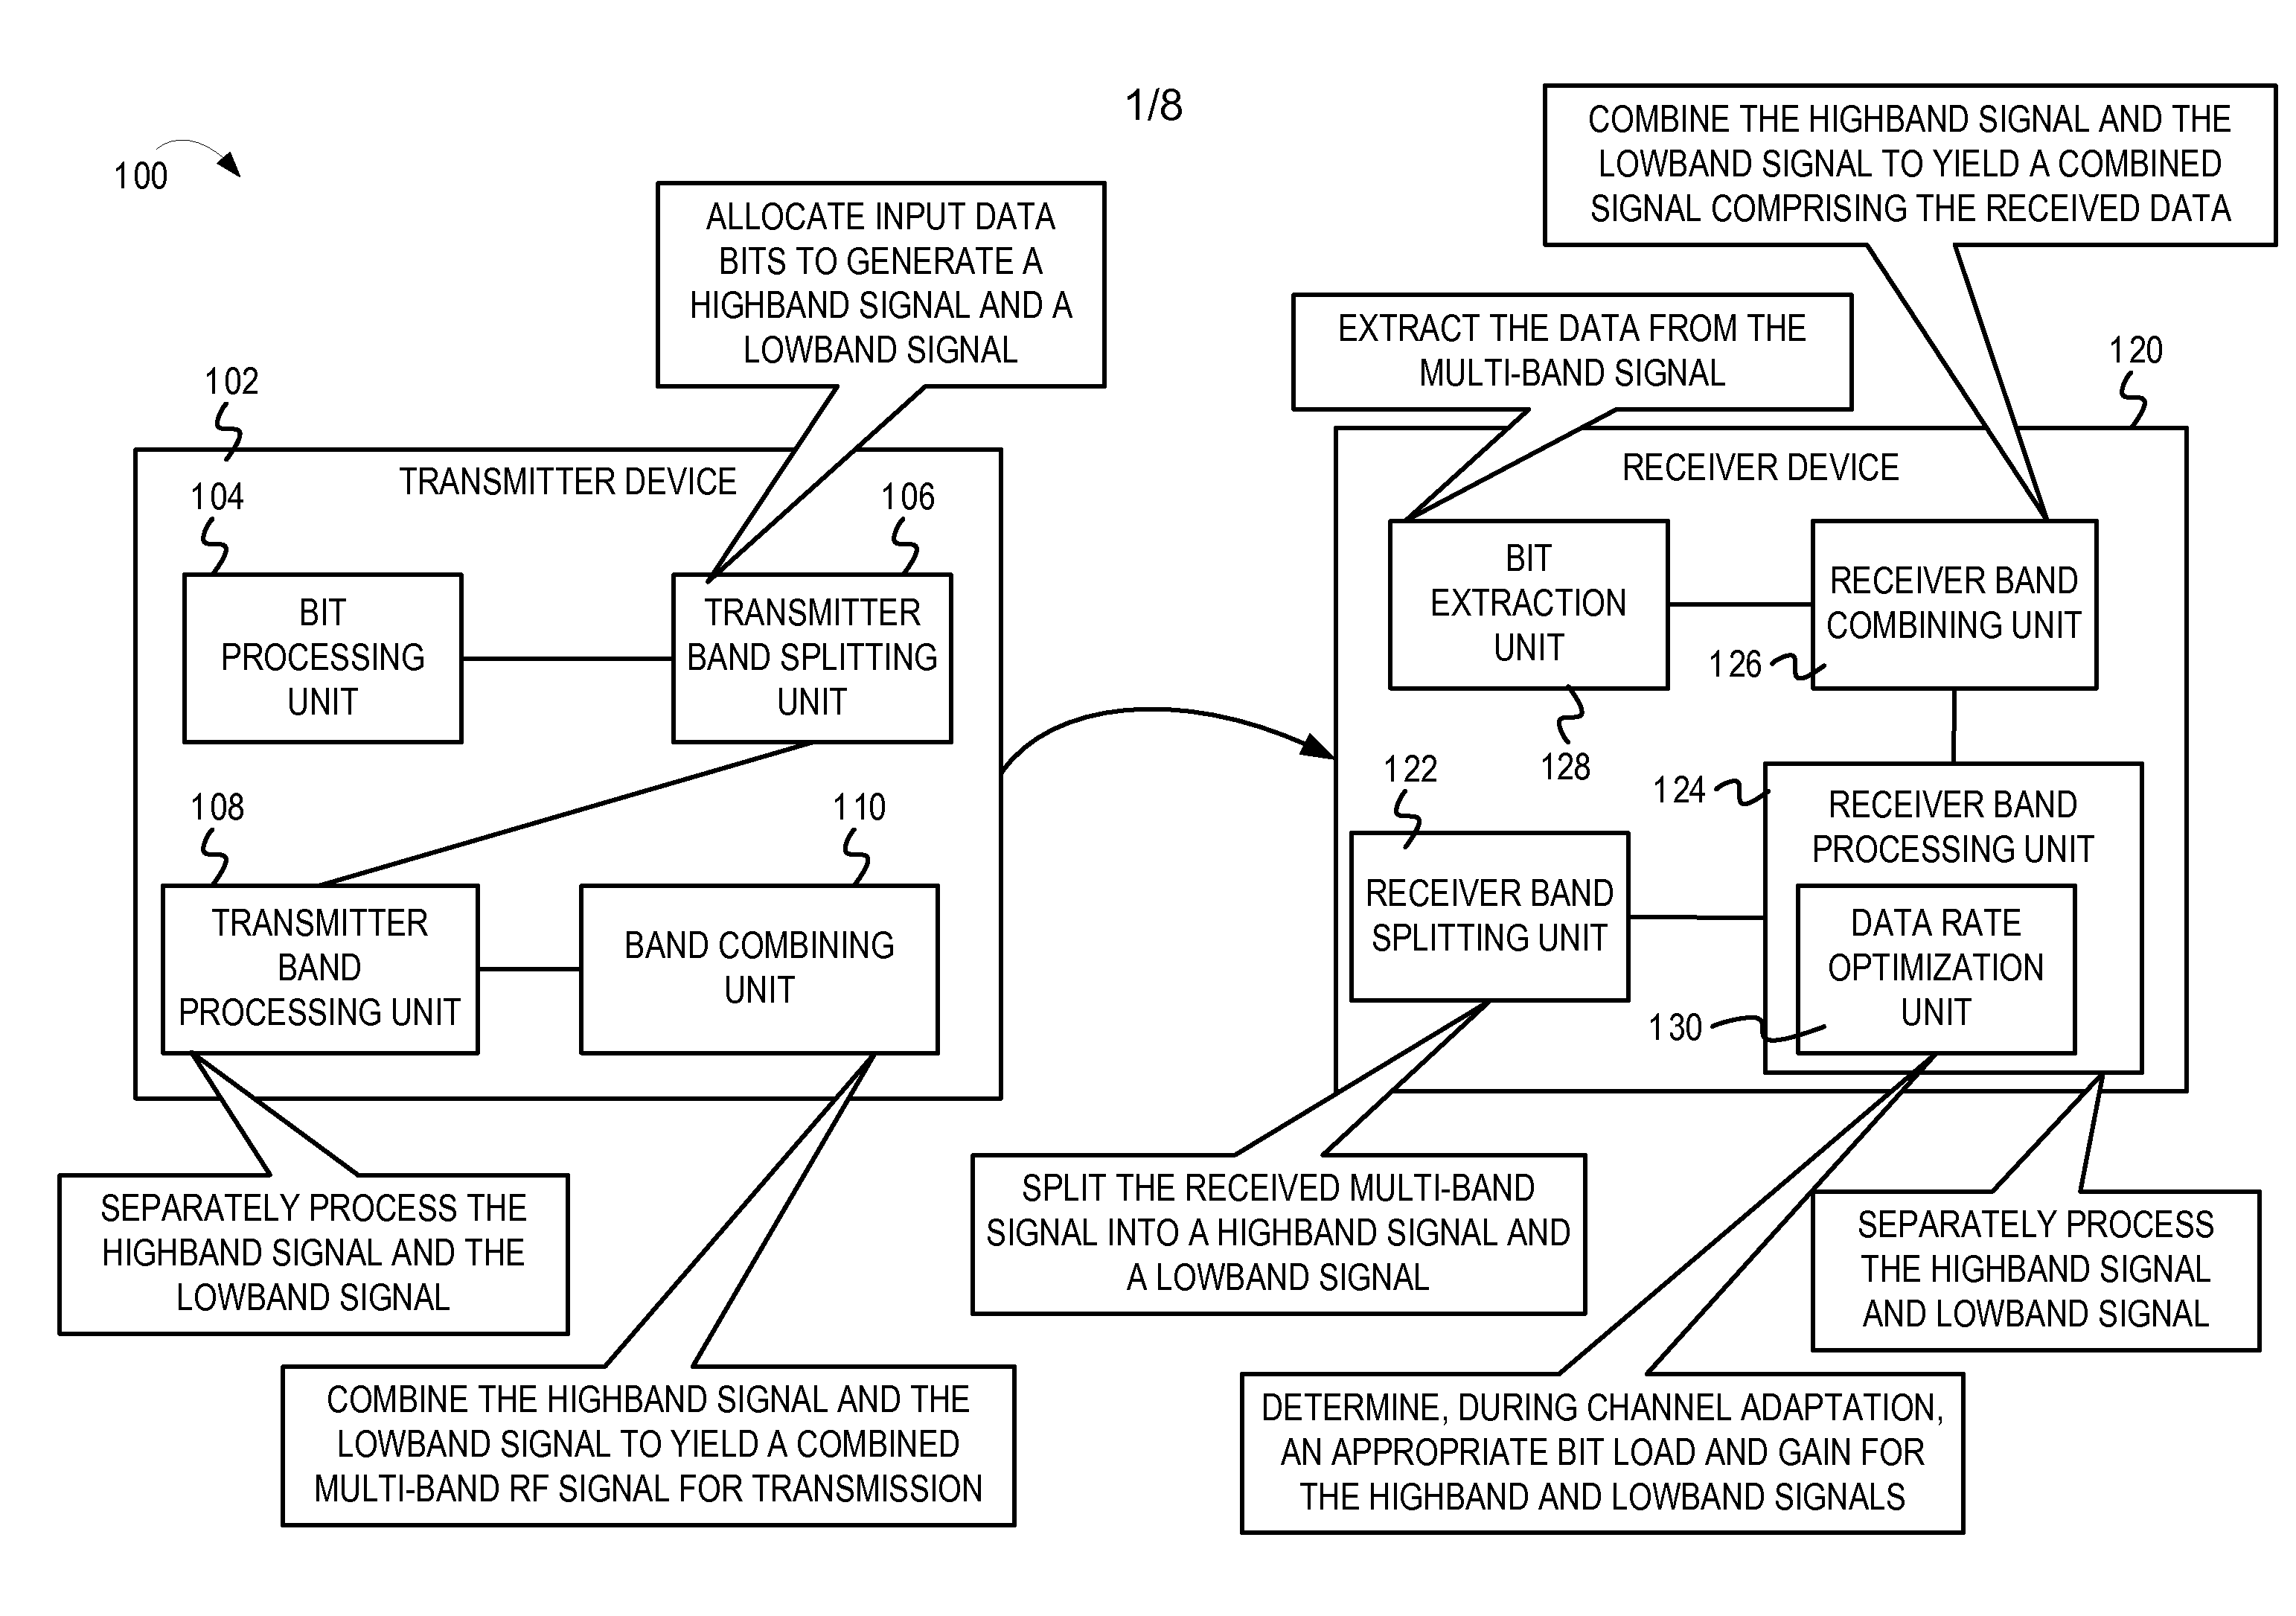 Optimizing data rate of multi-band multi-carrier communication systems